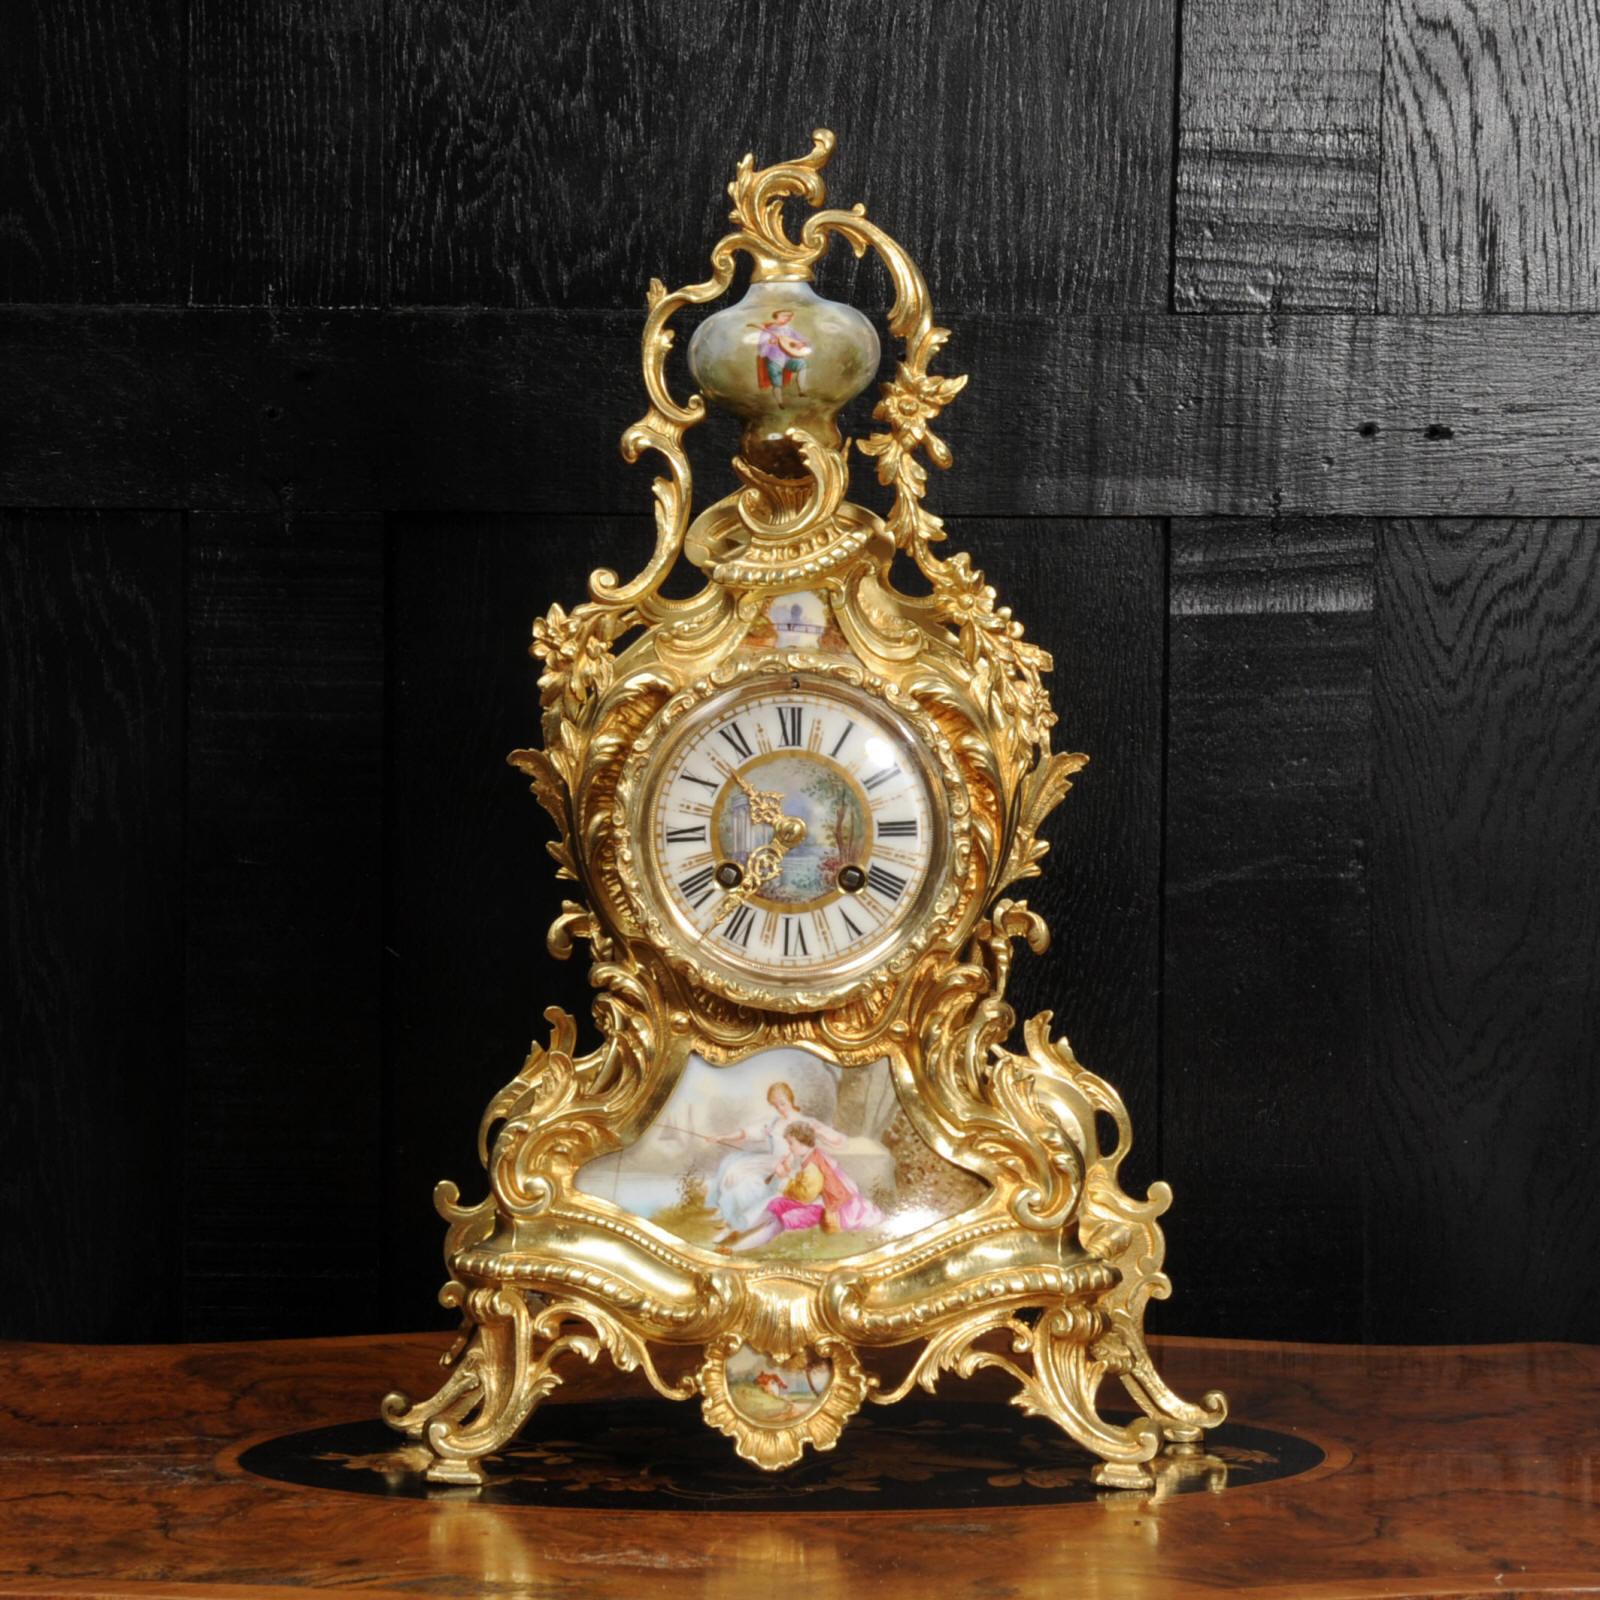 A stunning antique French Rococo clock, circa 1880. Beautifully made in finely gilded bronze and mounted with exquisite Sèvres style porcelain. The case is of a waisted design with profuse, twirling acanthus decoration and scrolls. Porcelain has a